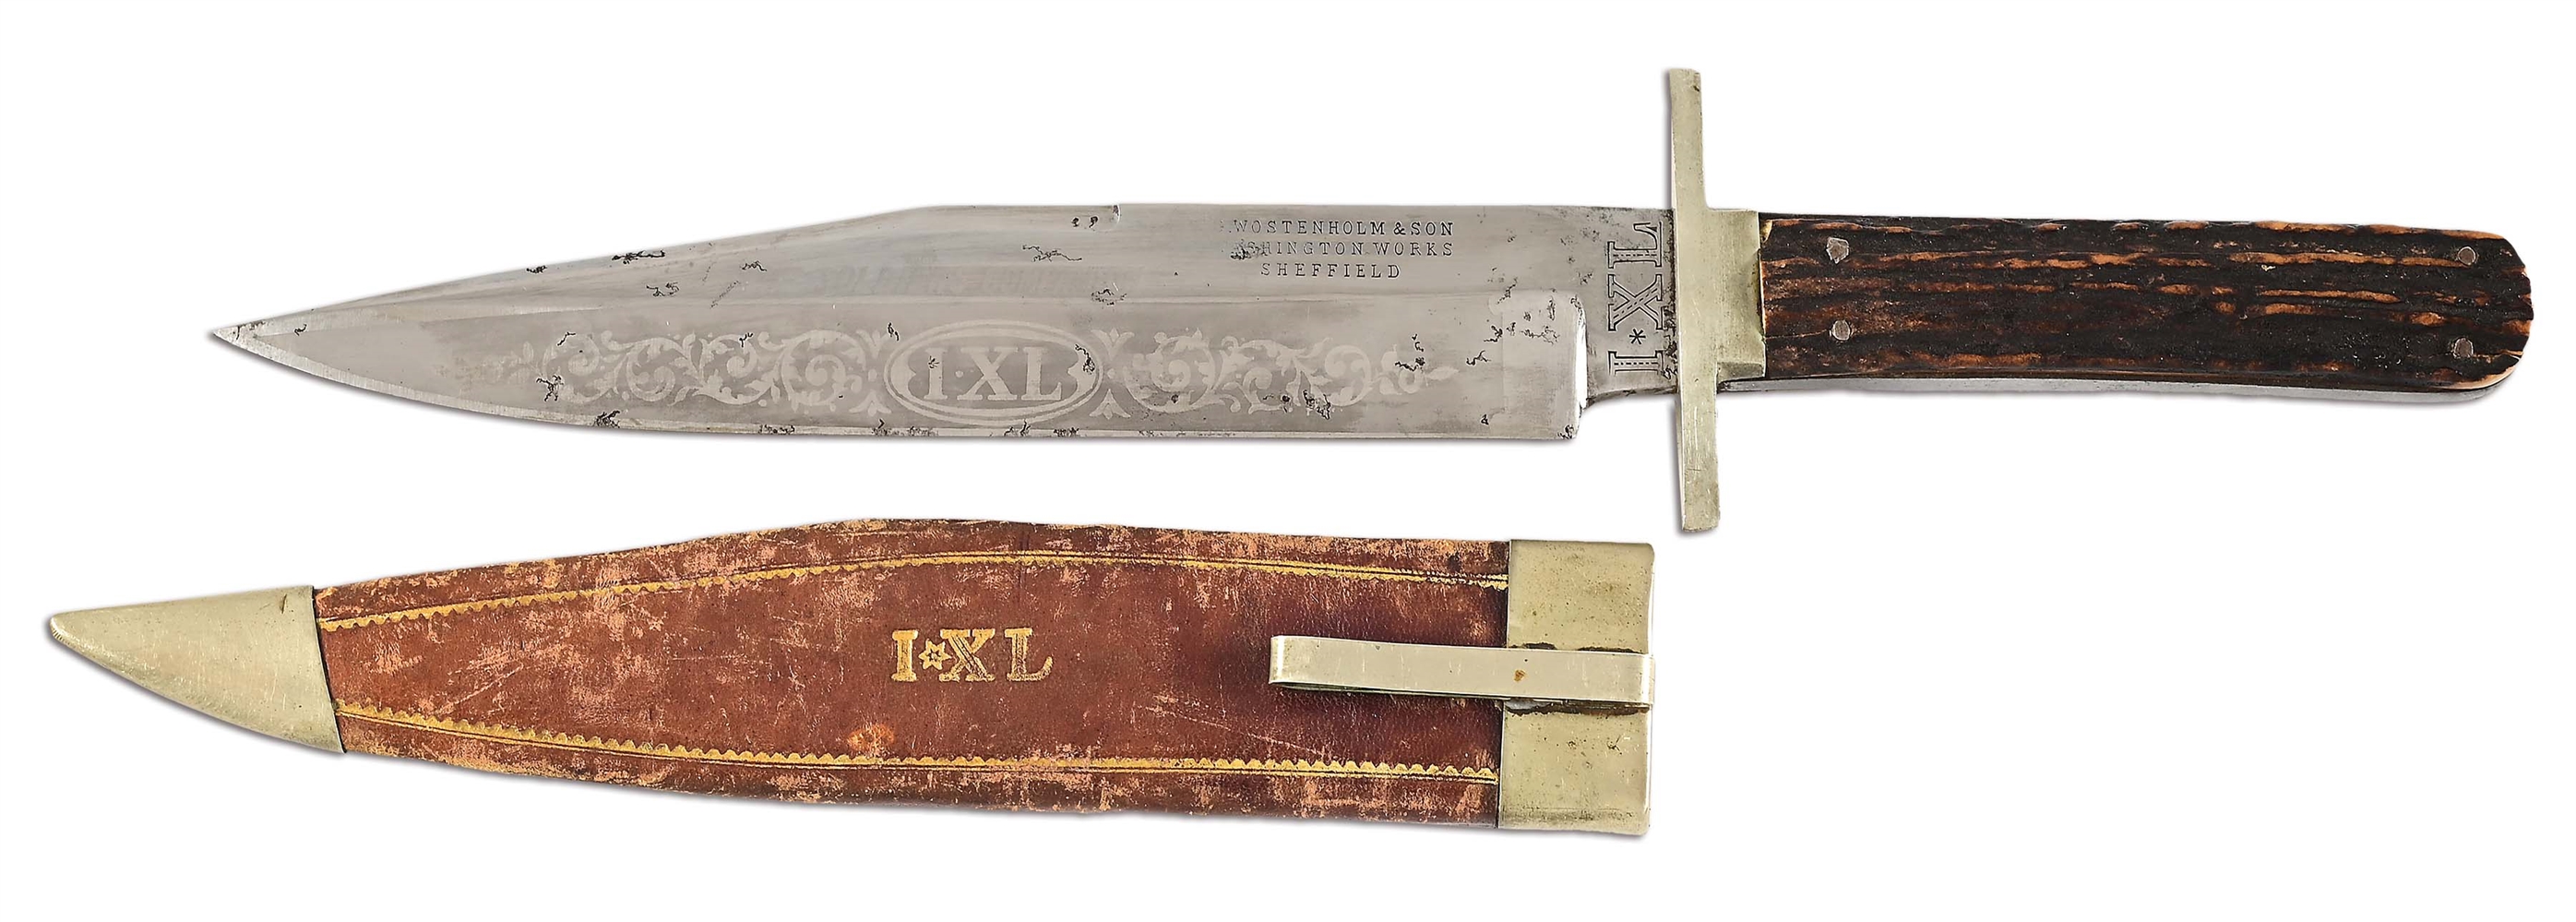 "SOLDIERS COMPANION" ETCHED CLIP POINT BOWIE KNIFE BY GEO. WOSTENHOLM, SHEFFIELD.